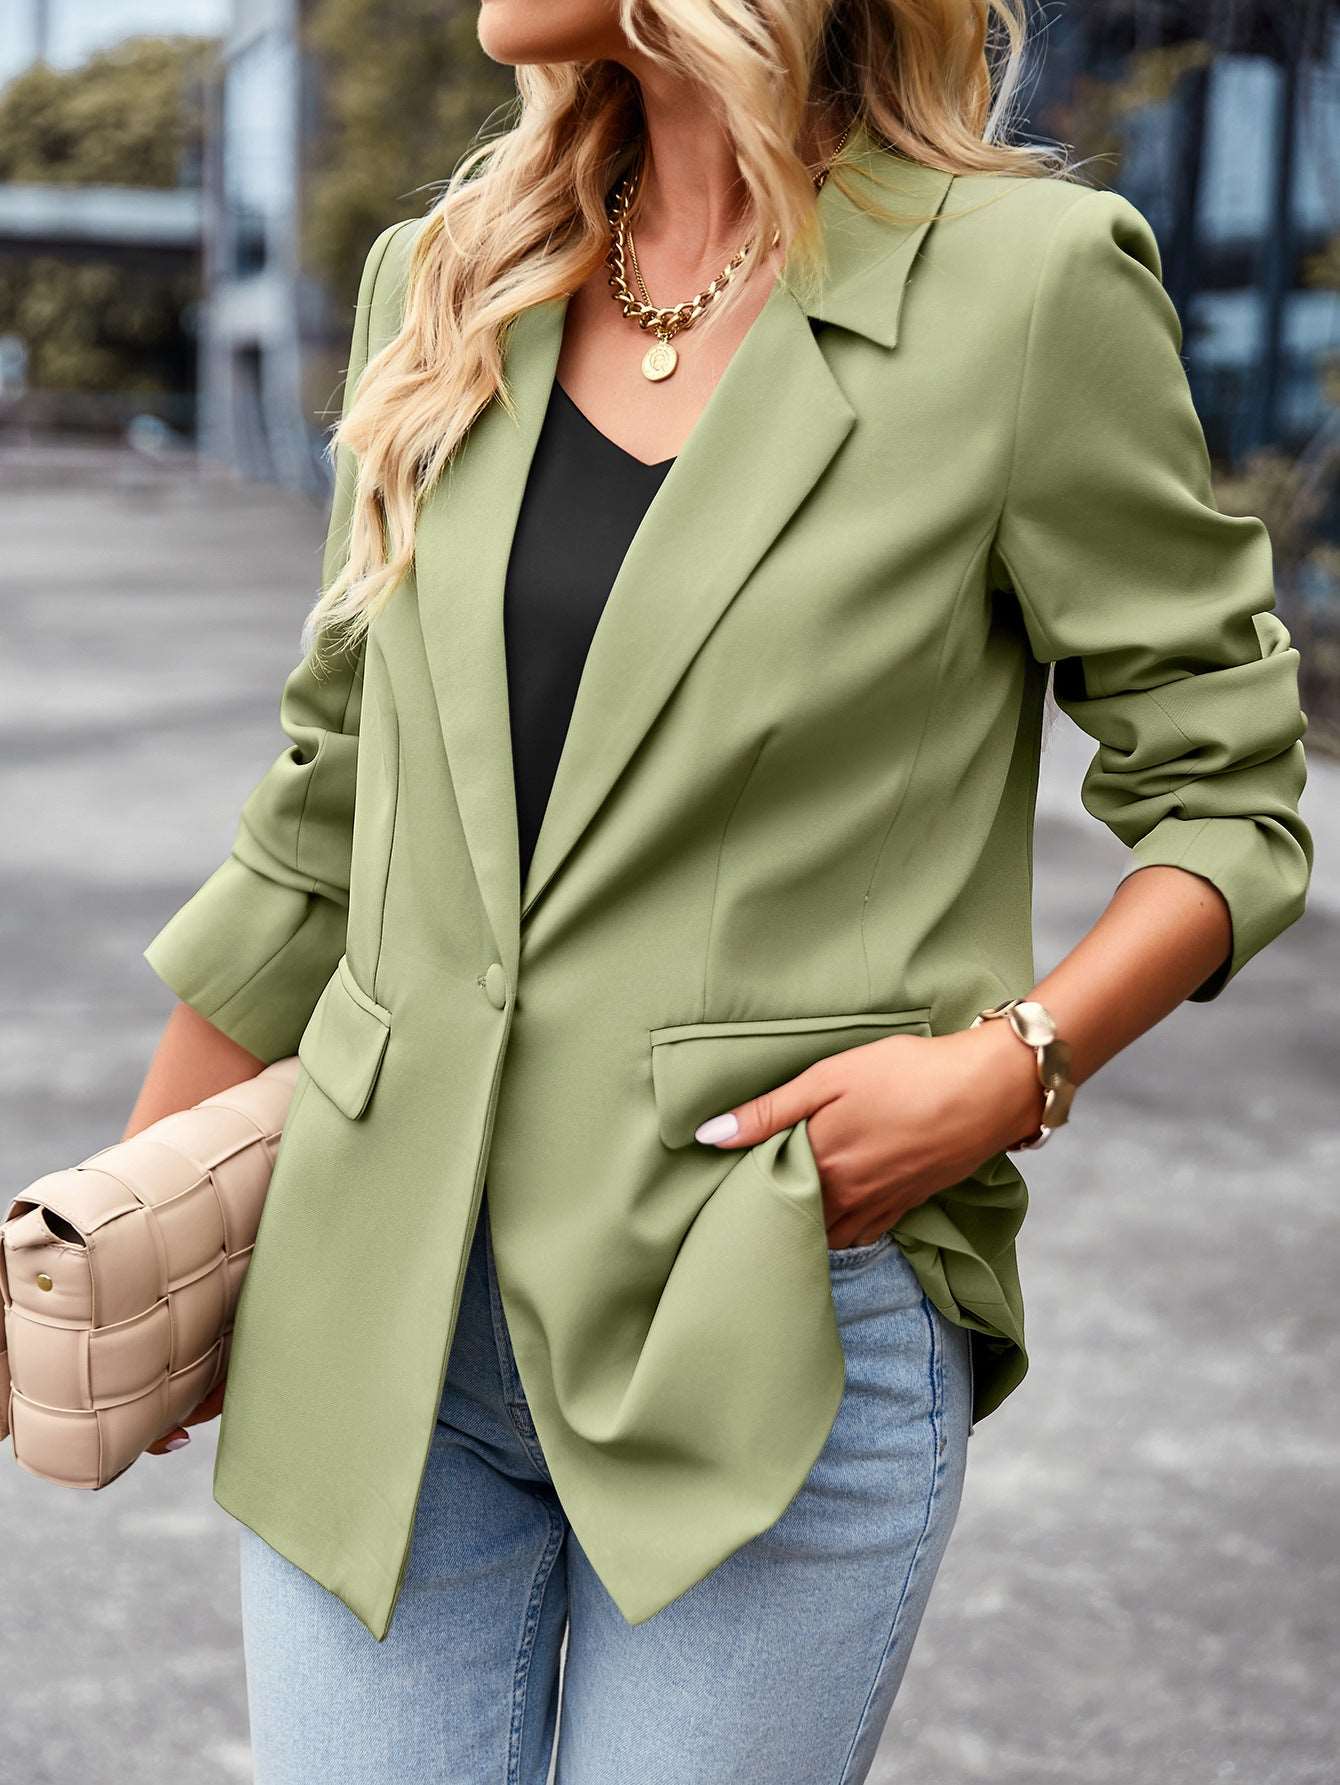 Women's casual suit outer sleeve buttons lapel jacket